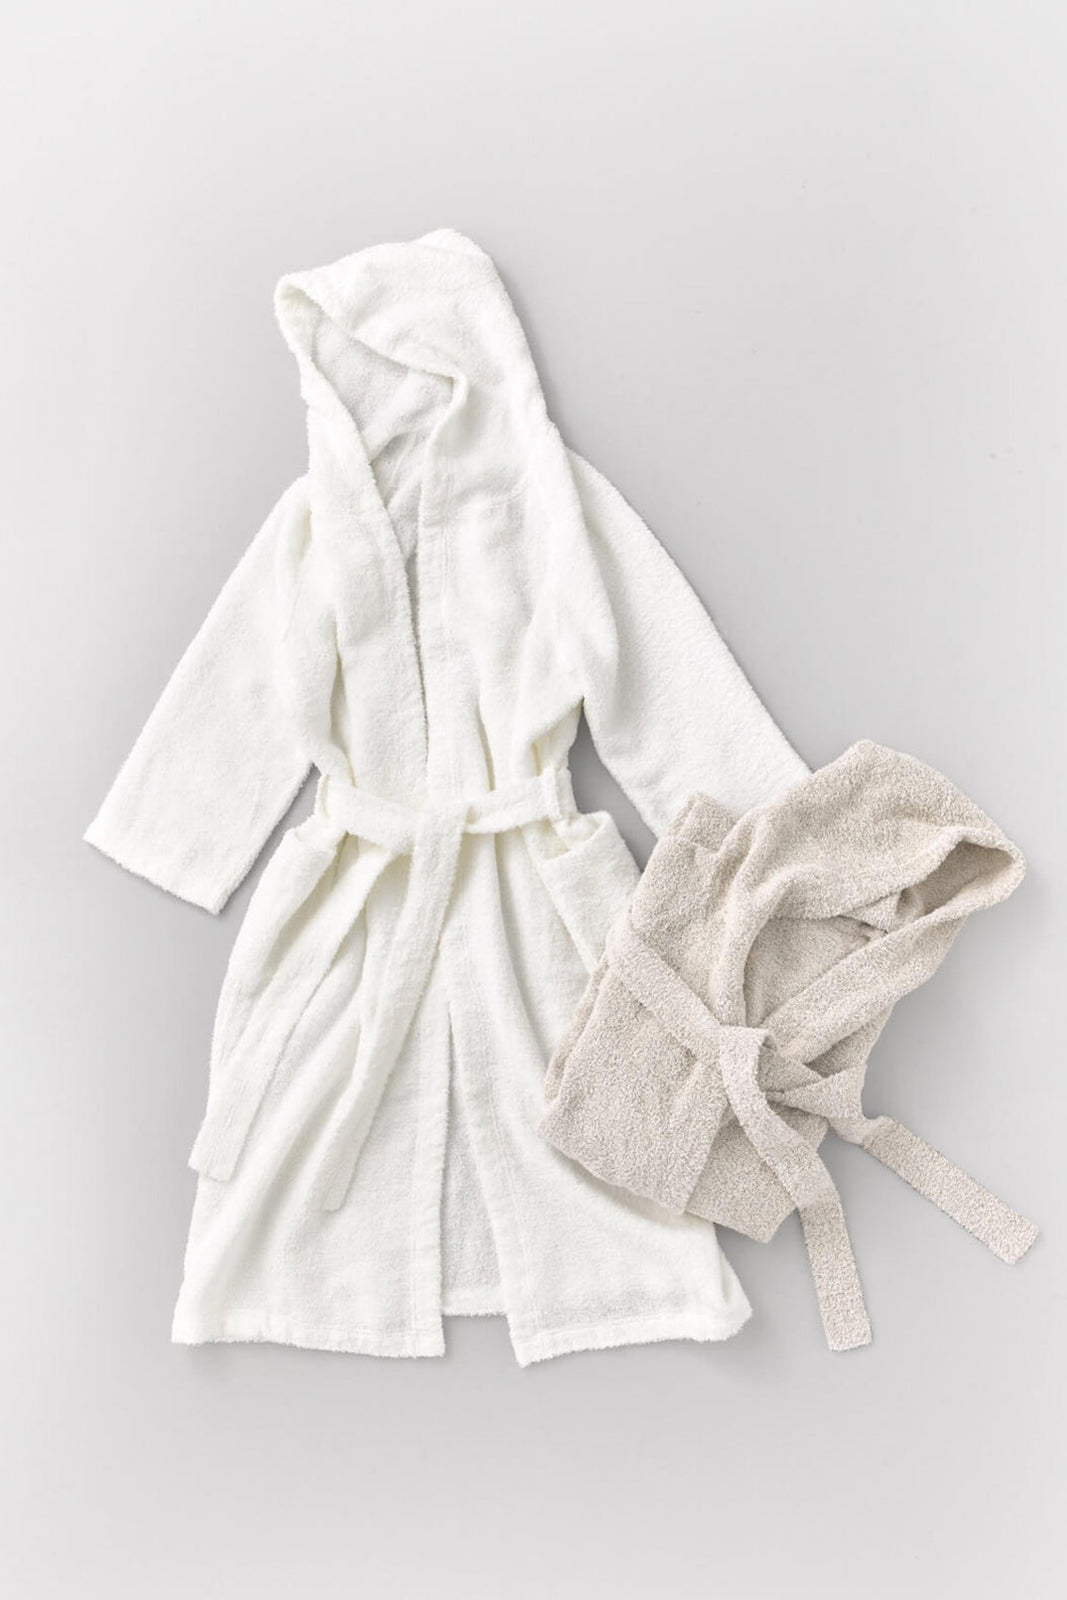 Arts-and-Science-hooded-bath-robe-white-amarees